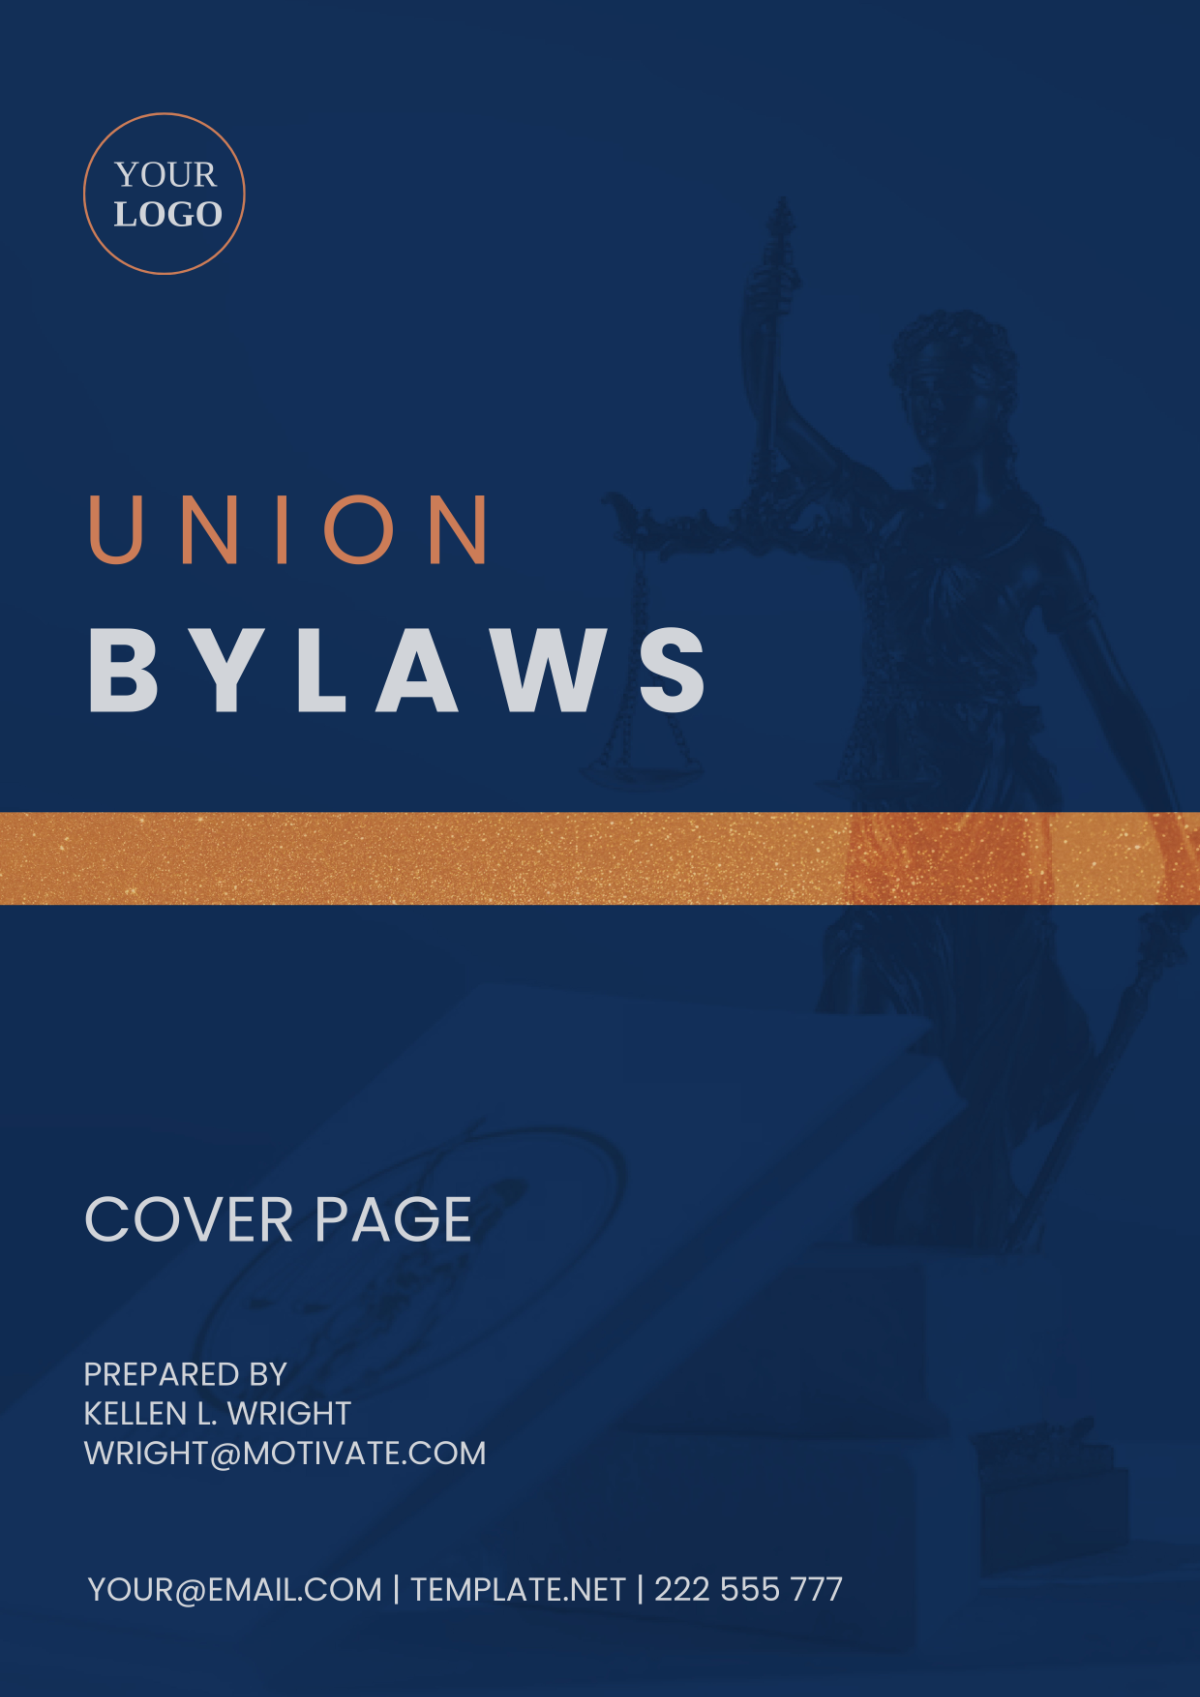 Union Bylaws Cover Page Template